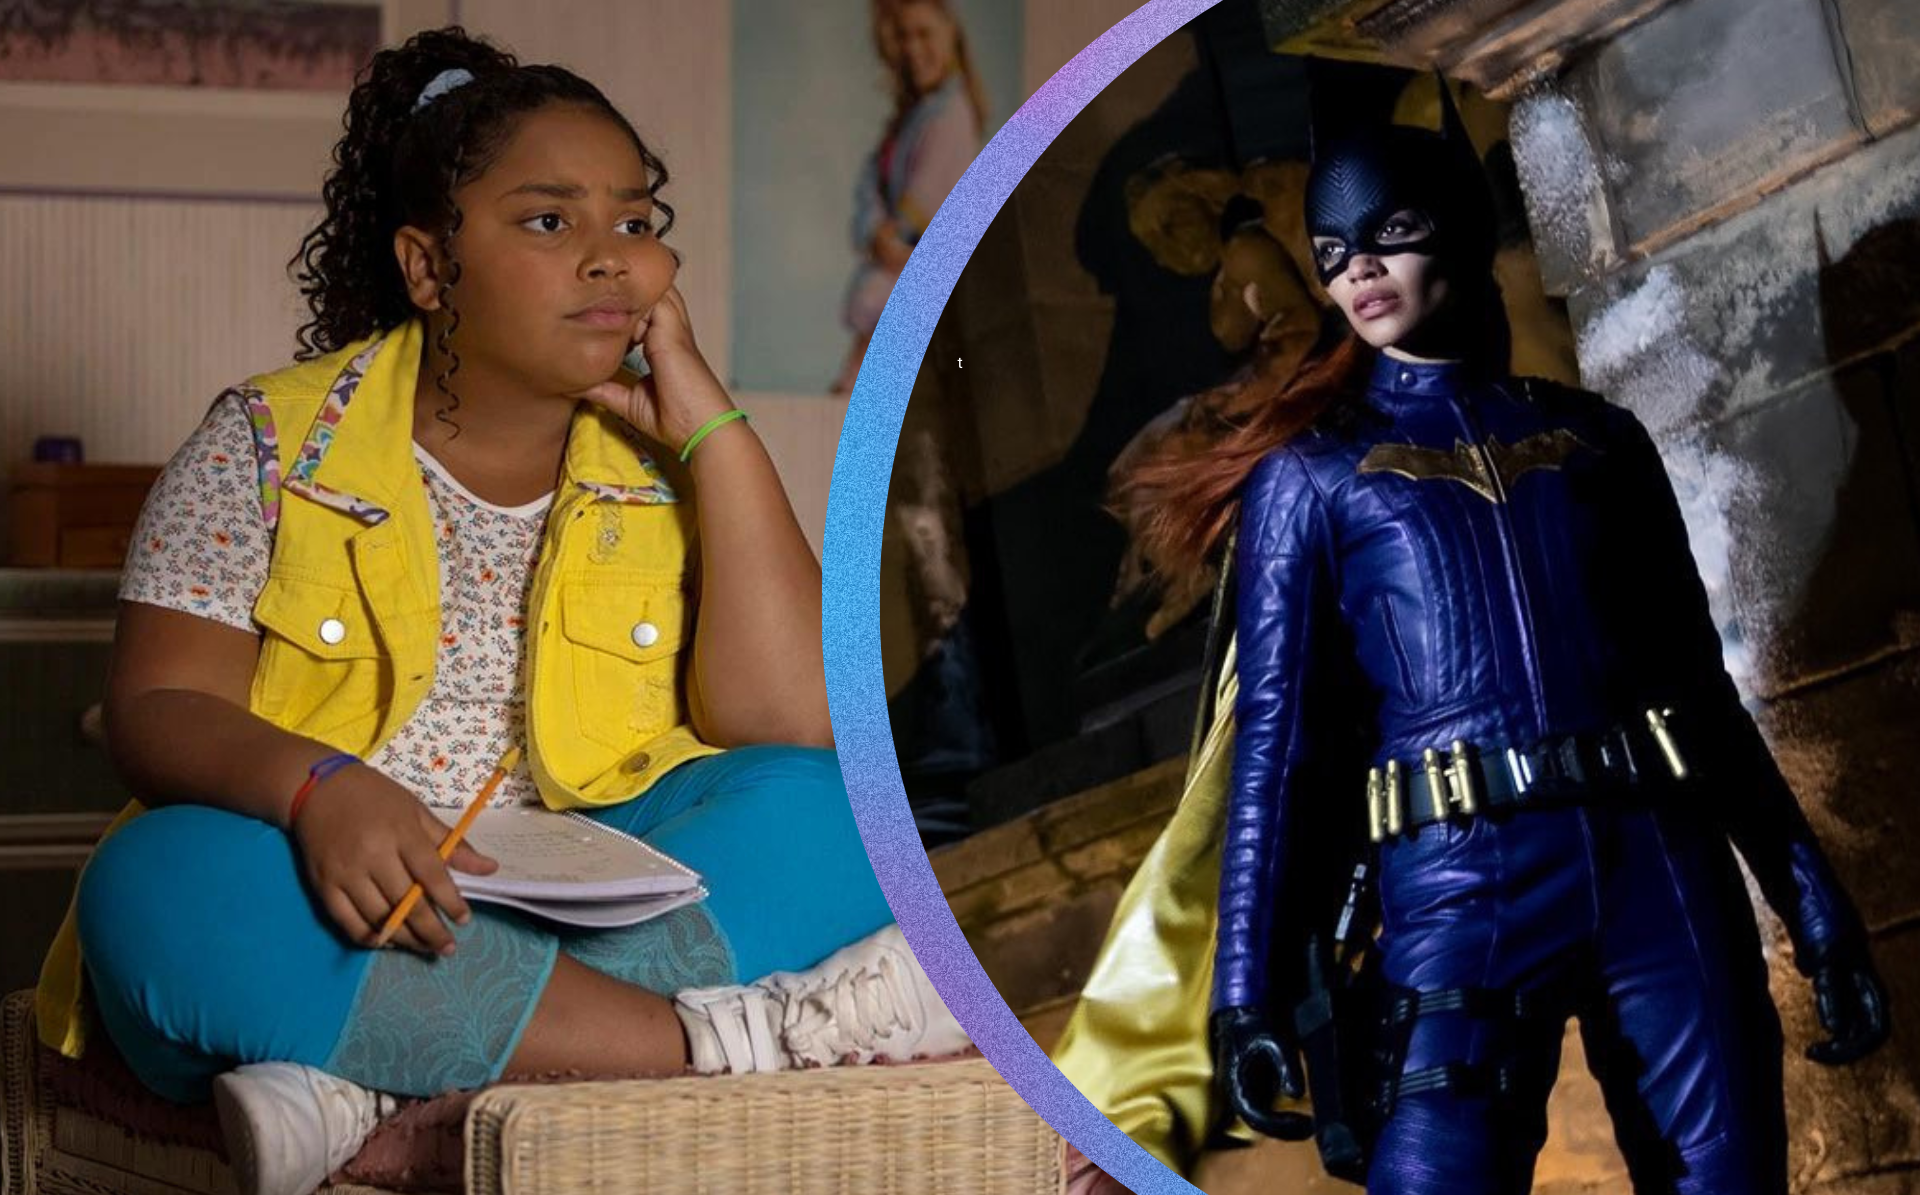 On the left is Cucu Castelli from Gordita Chronicles sitting with her legs crossed on a bed doing homework. She is wearing a bright yellow vest with a white shirt underneath with blue pants. On the right is Leslie Grace as Barbara Gordon in her Batgirl costume in all black with a purple and gold cape.